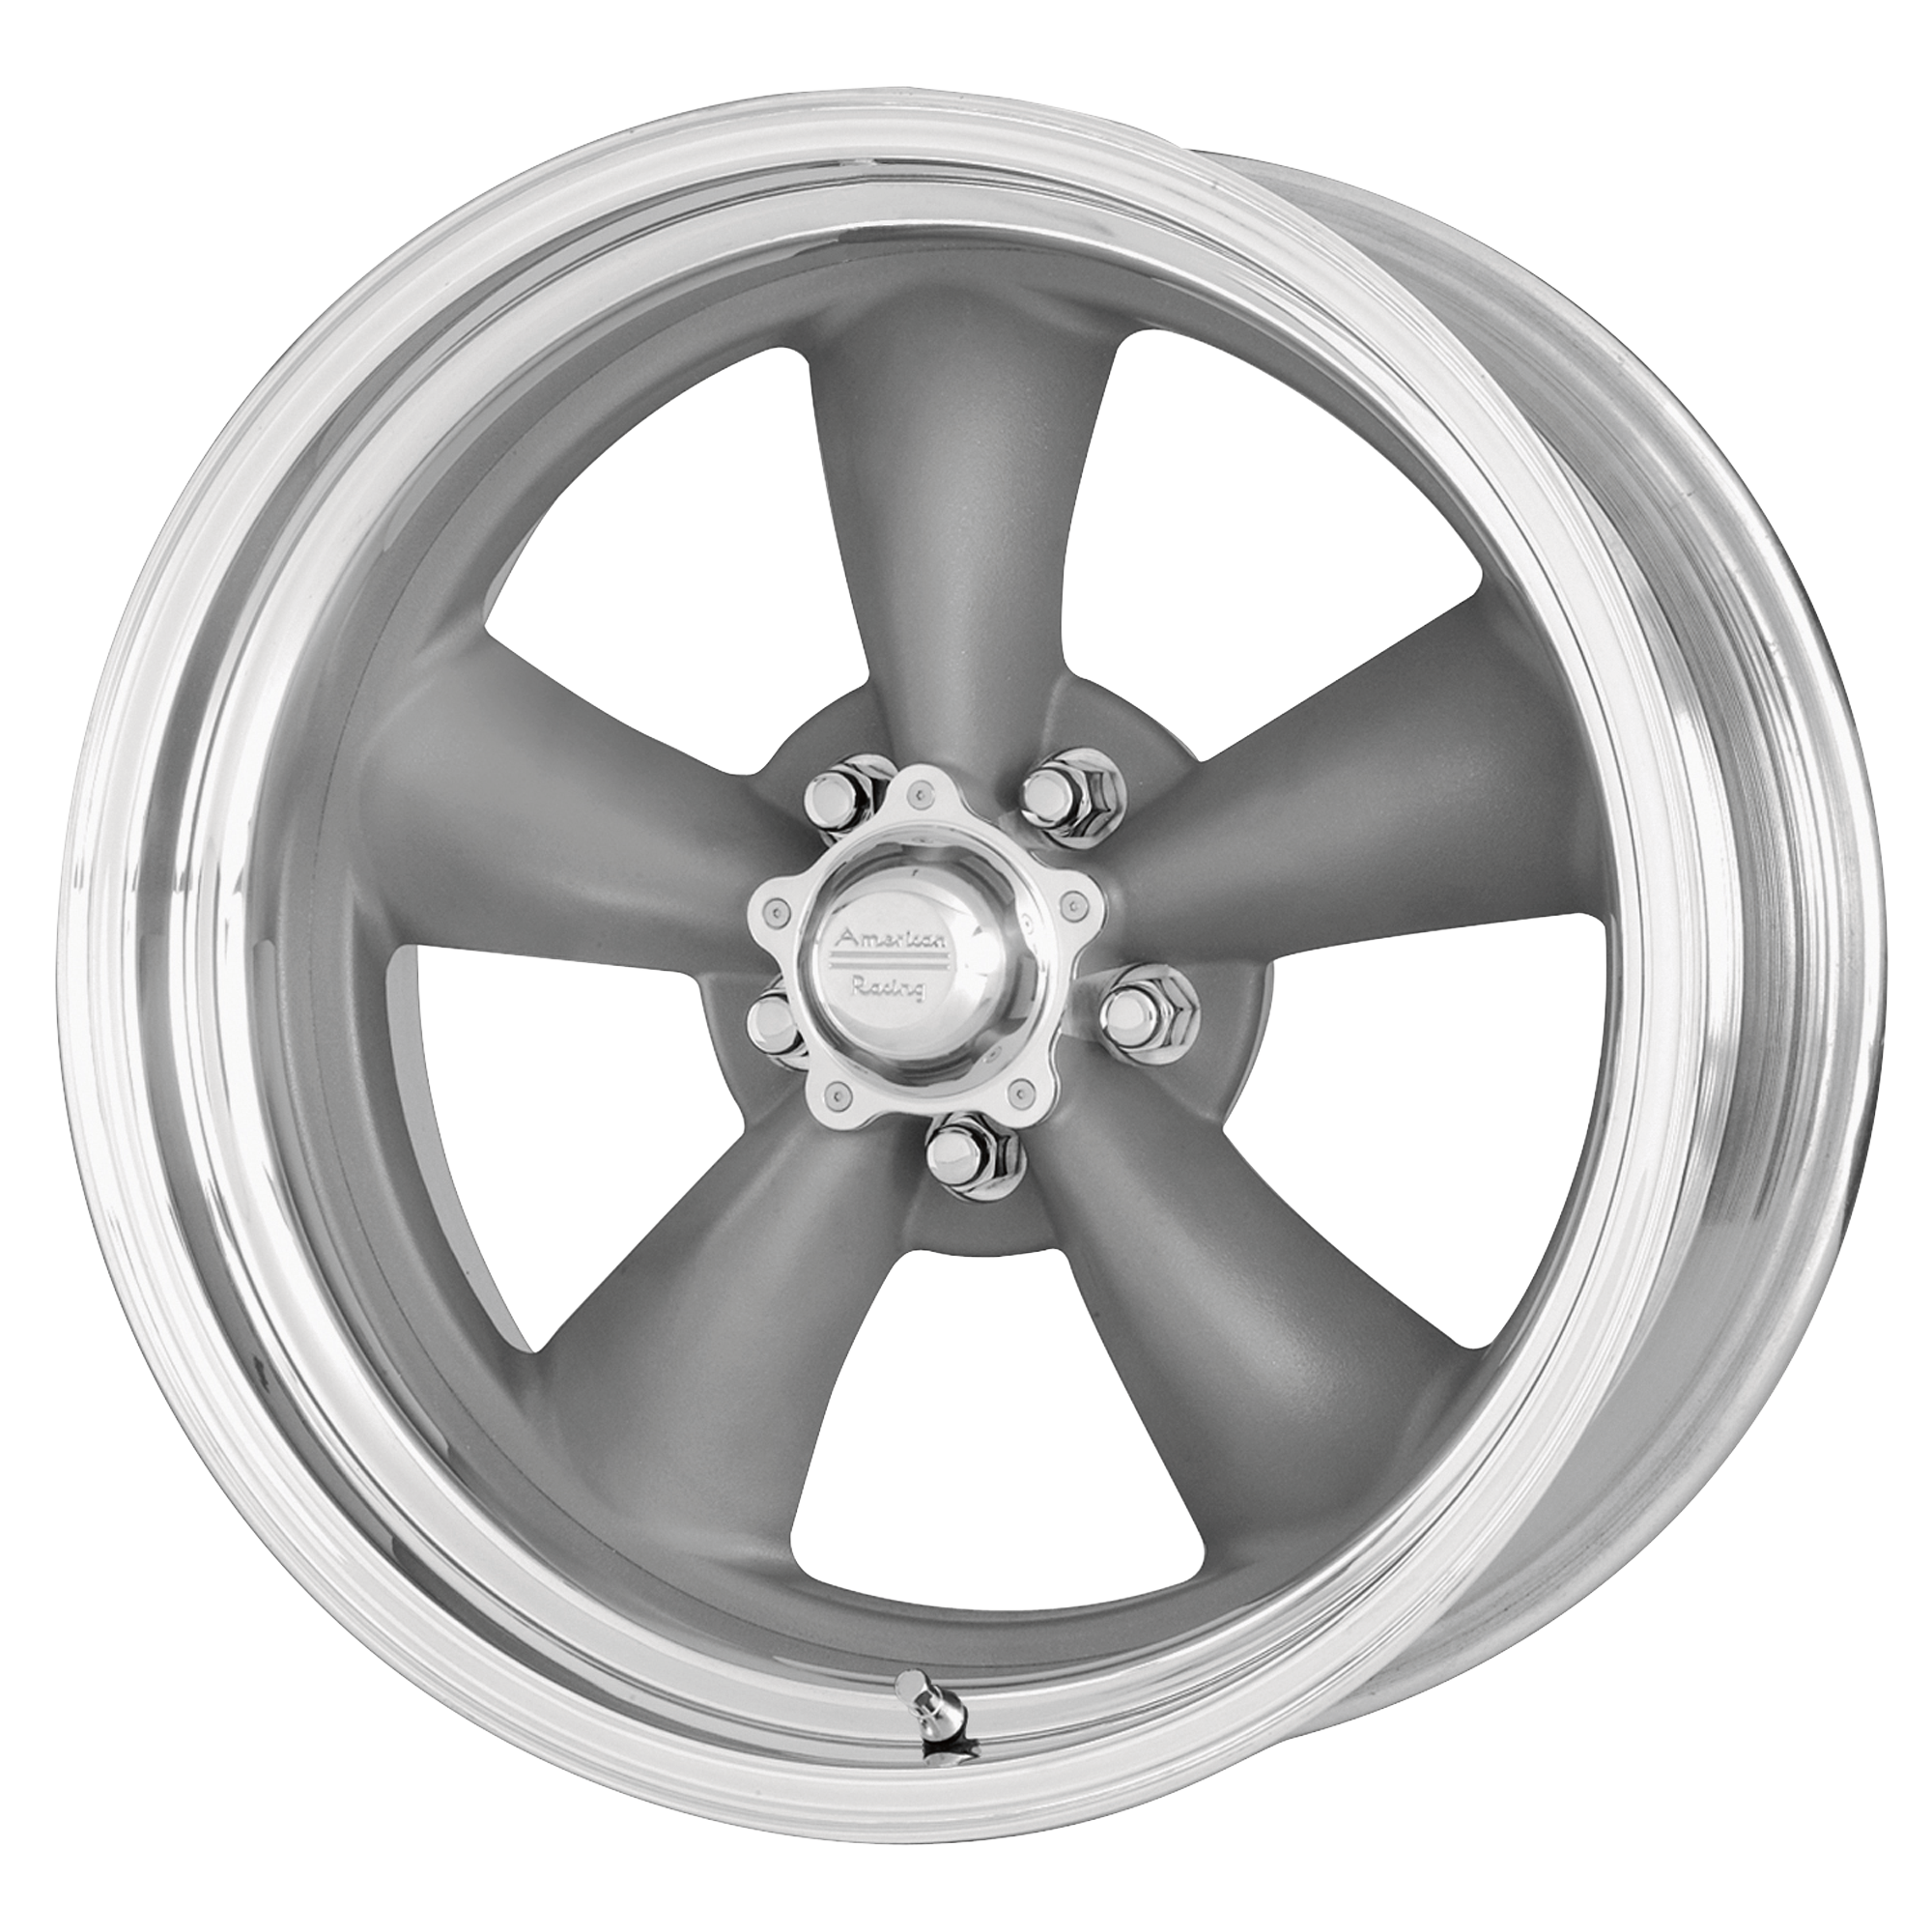 CLASSIC TORQ THRUST II ONE PIECE 16x8 5x120.65 MAG GRAY W/ MACHINED LIP (8 mm) - Tires and Engine Performance